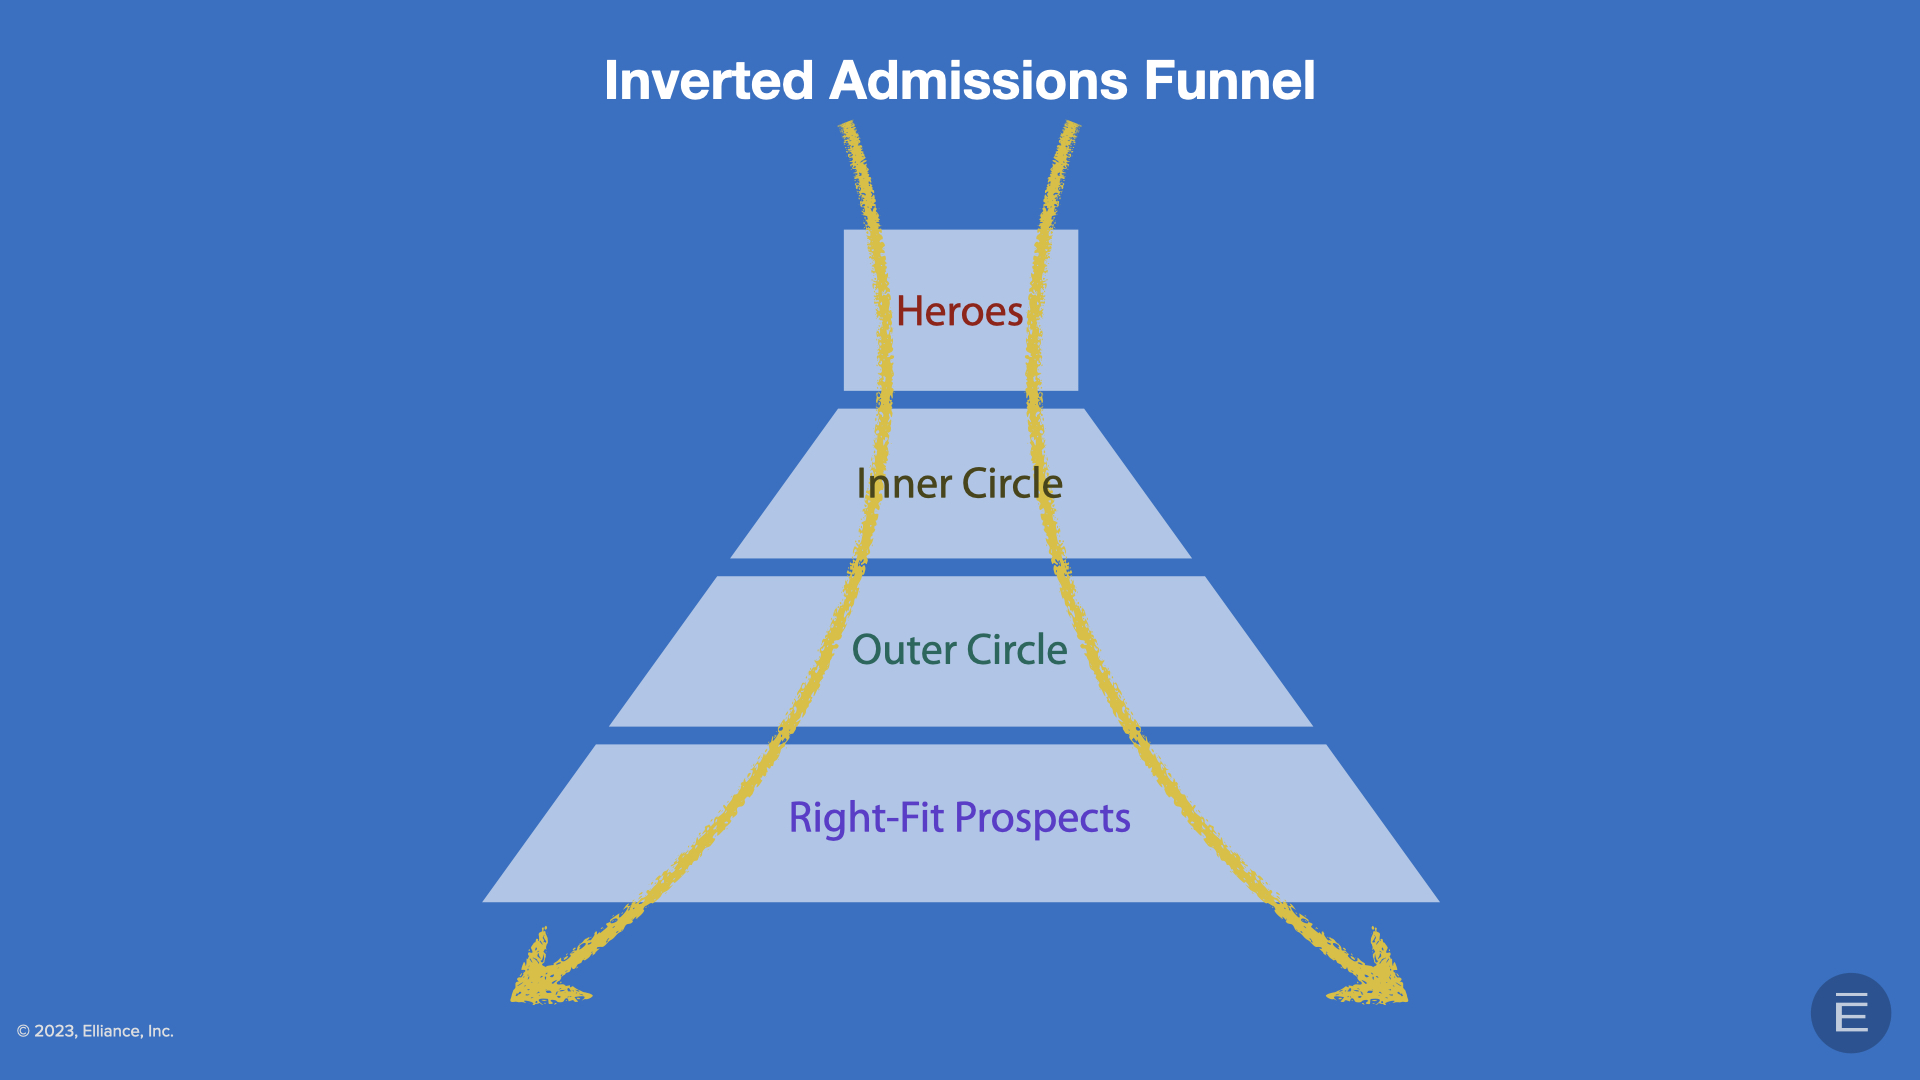 Student Search Services: Inverted Admissions Funnel